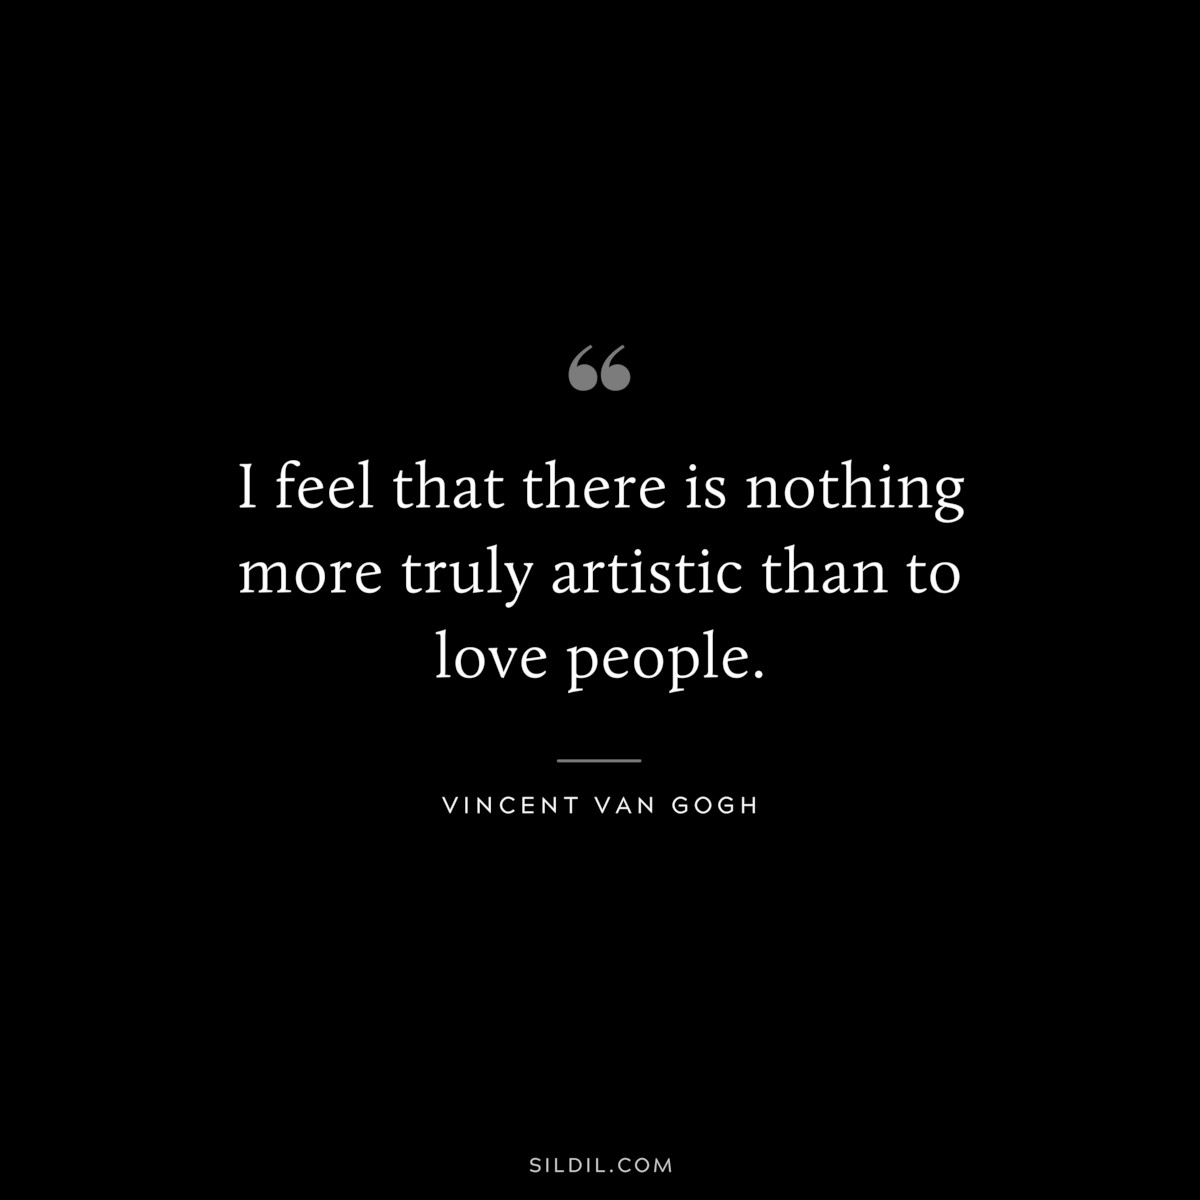 I feel that there is nothing more truly artistic than to love people. ― Vincent van Gogh